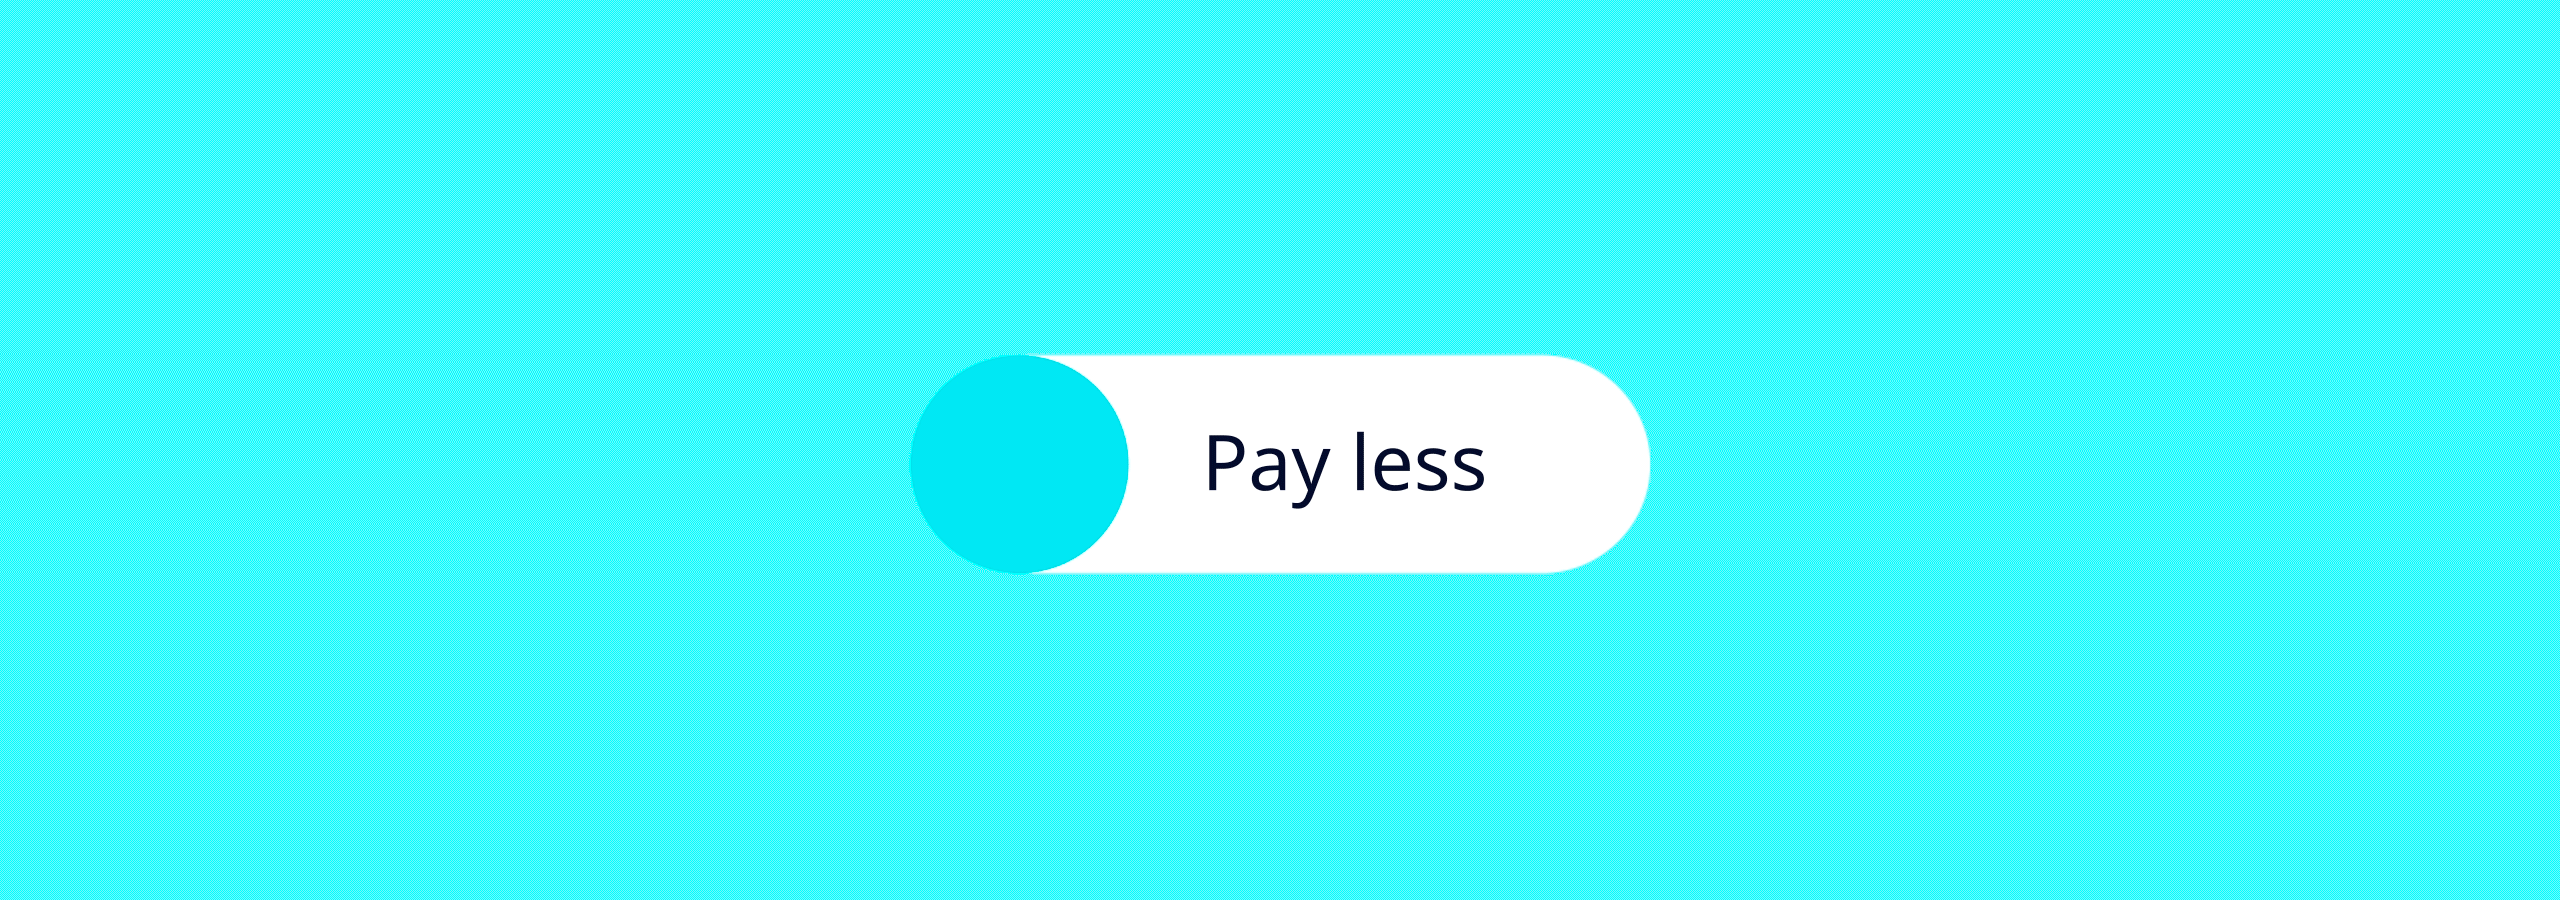 Pay less for more